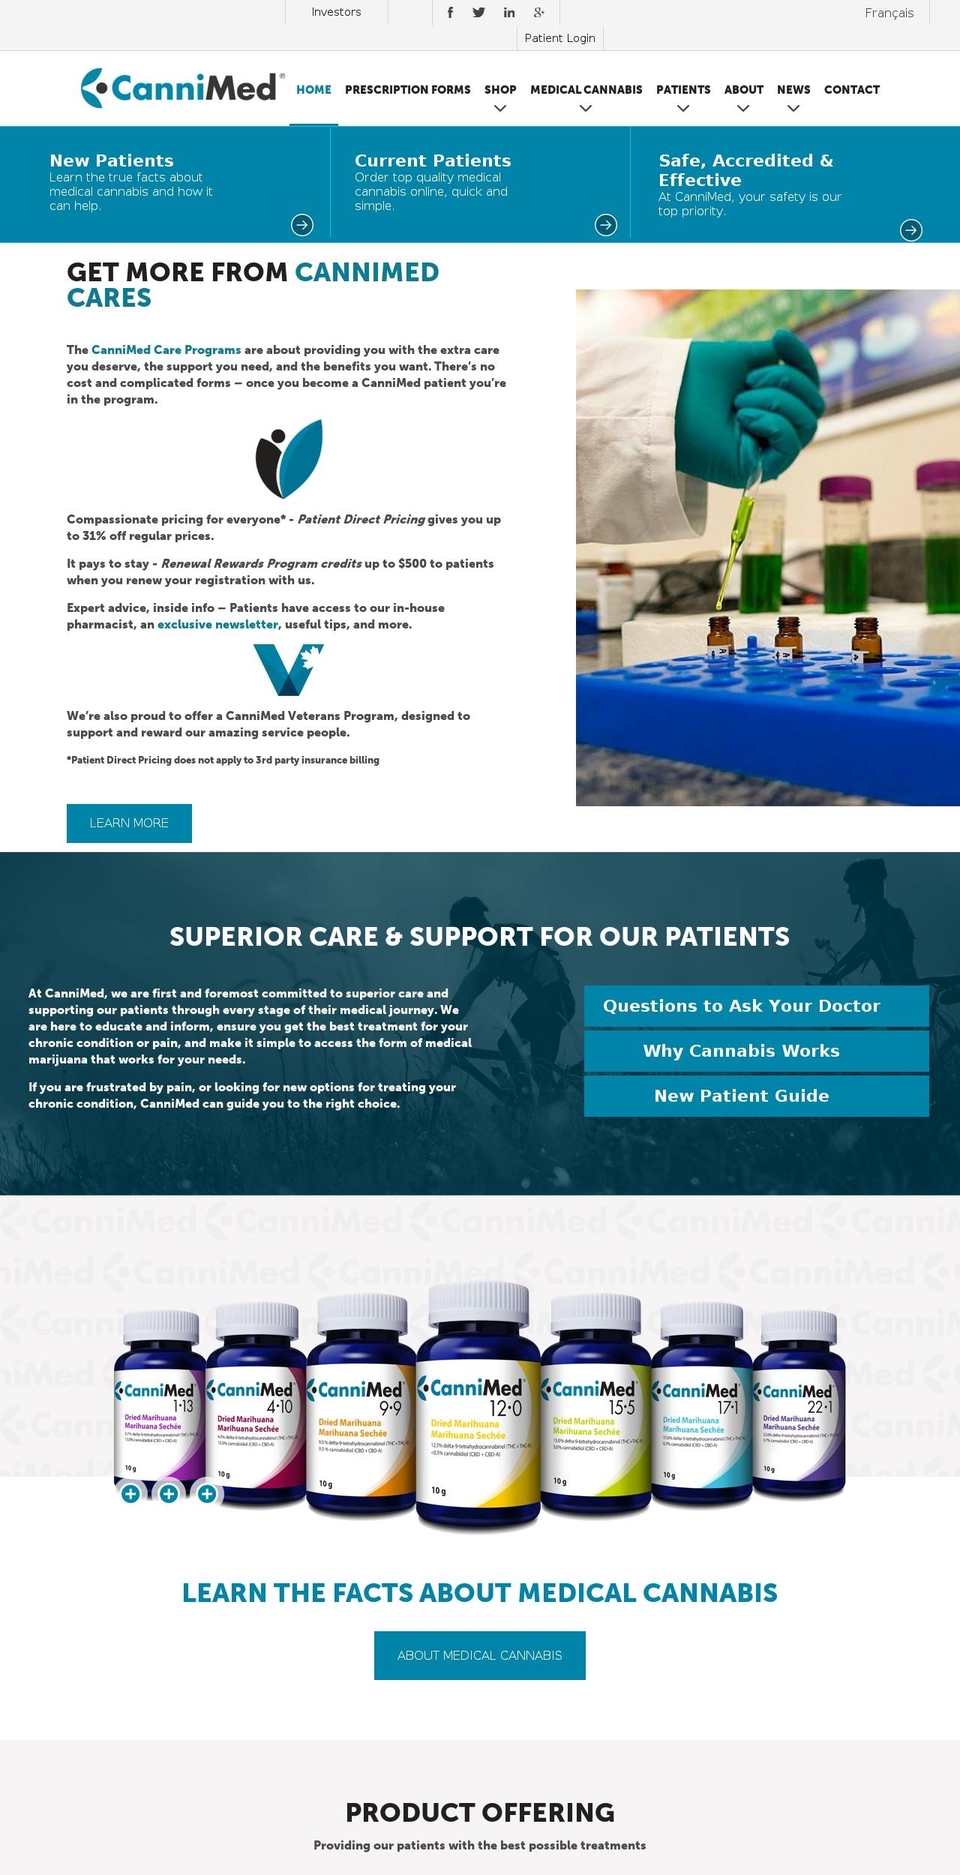 hotfix - releasev.. - Sept Shopify theme site example cannimed.ca